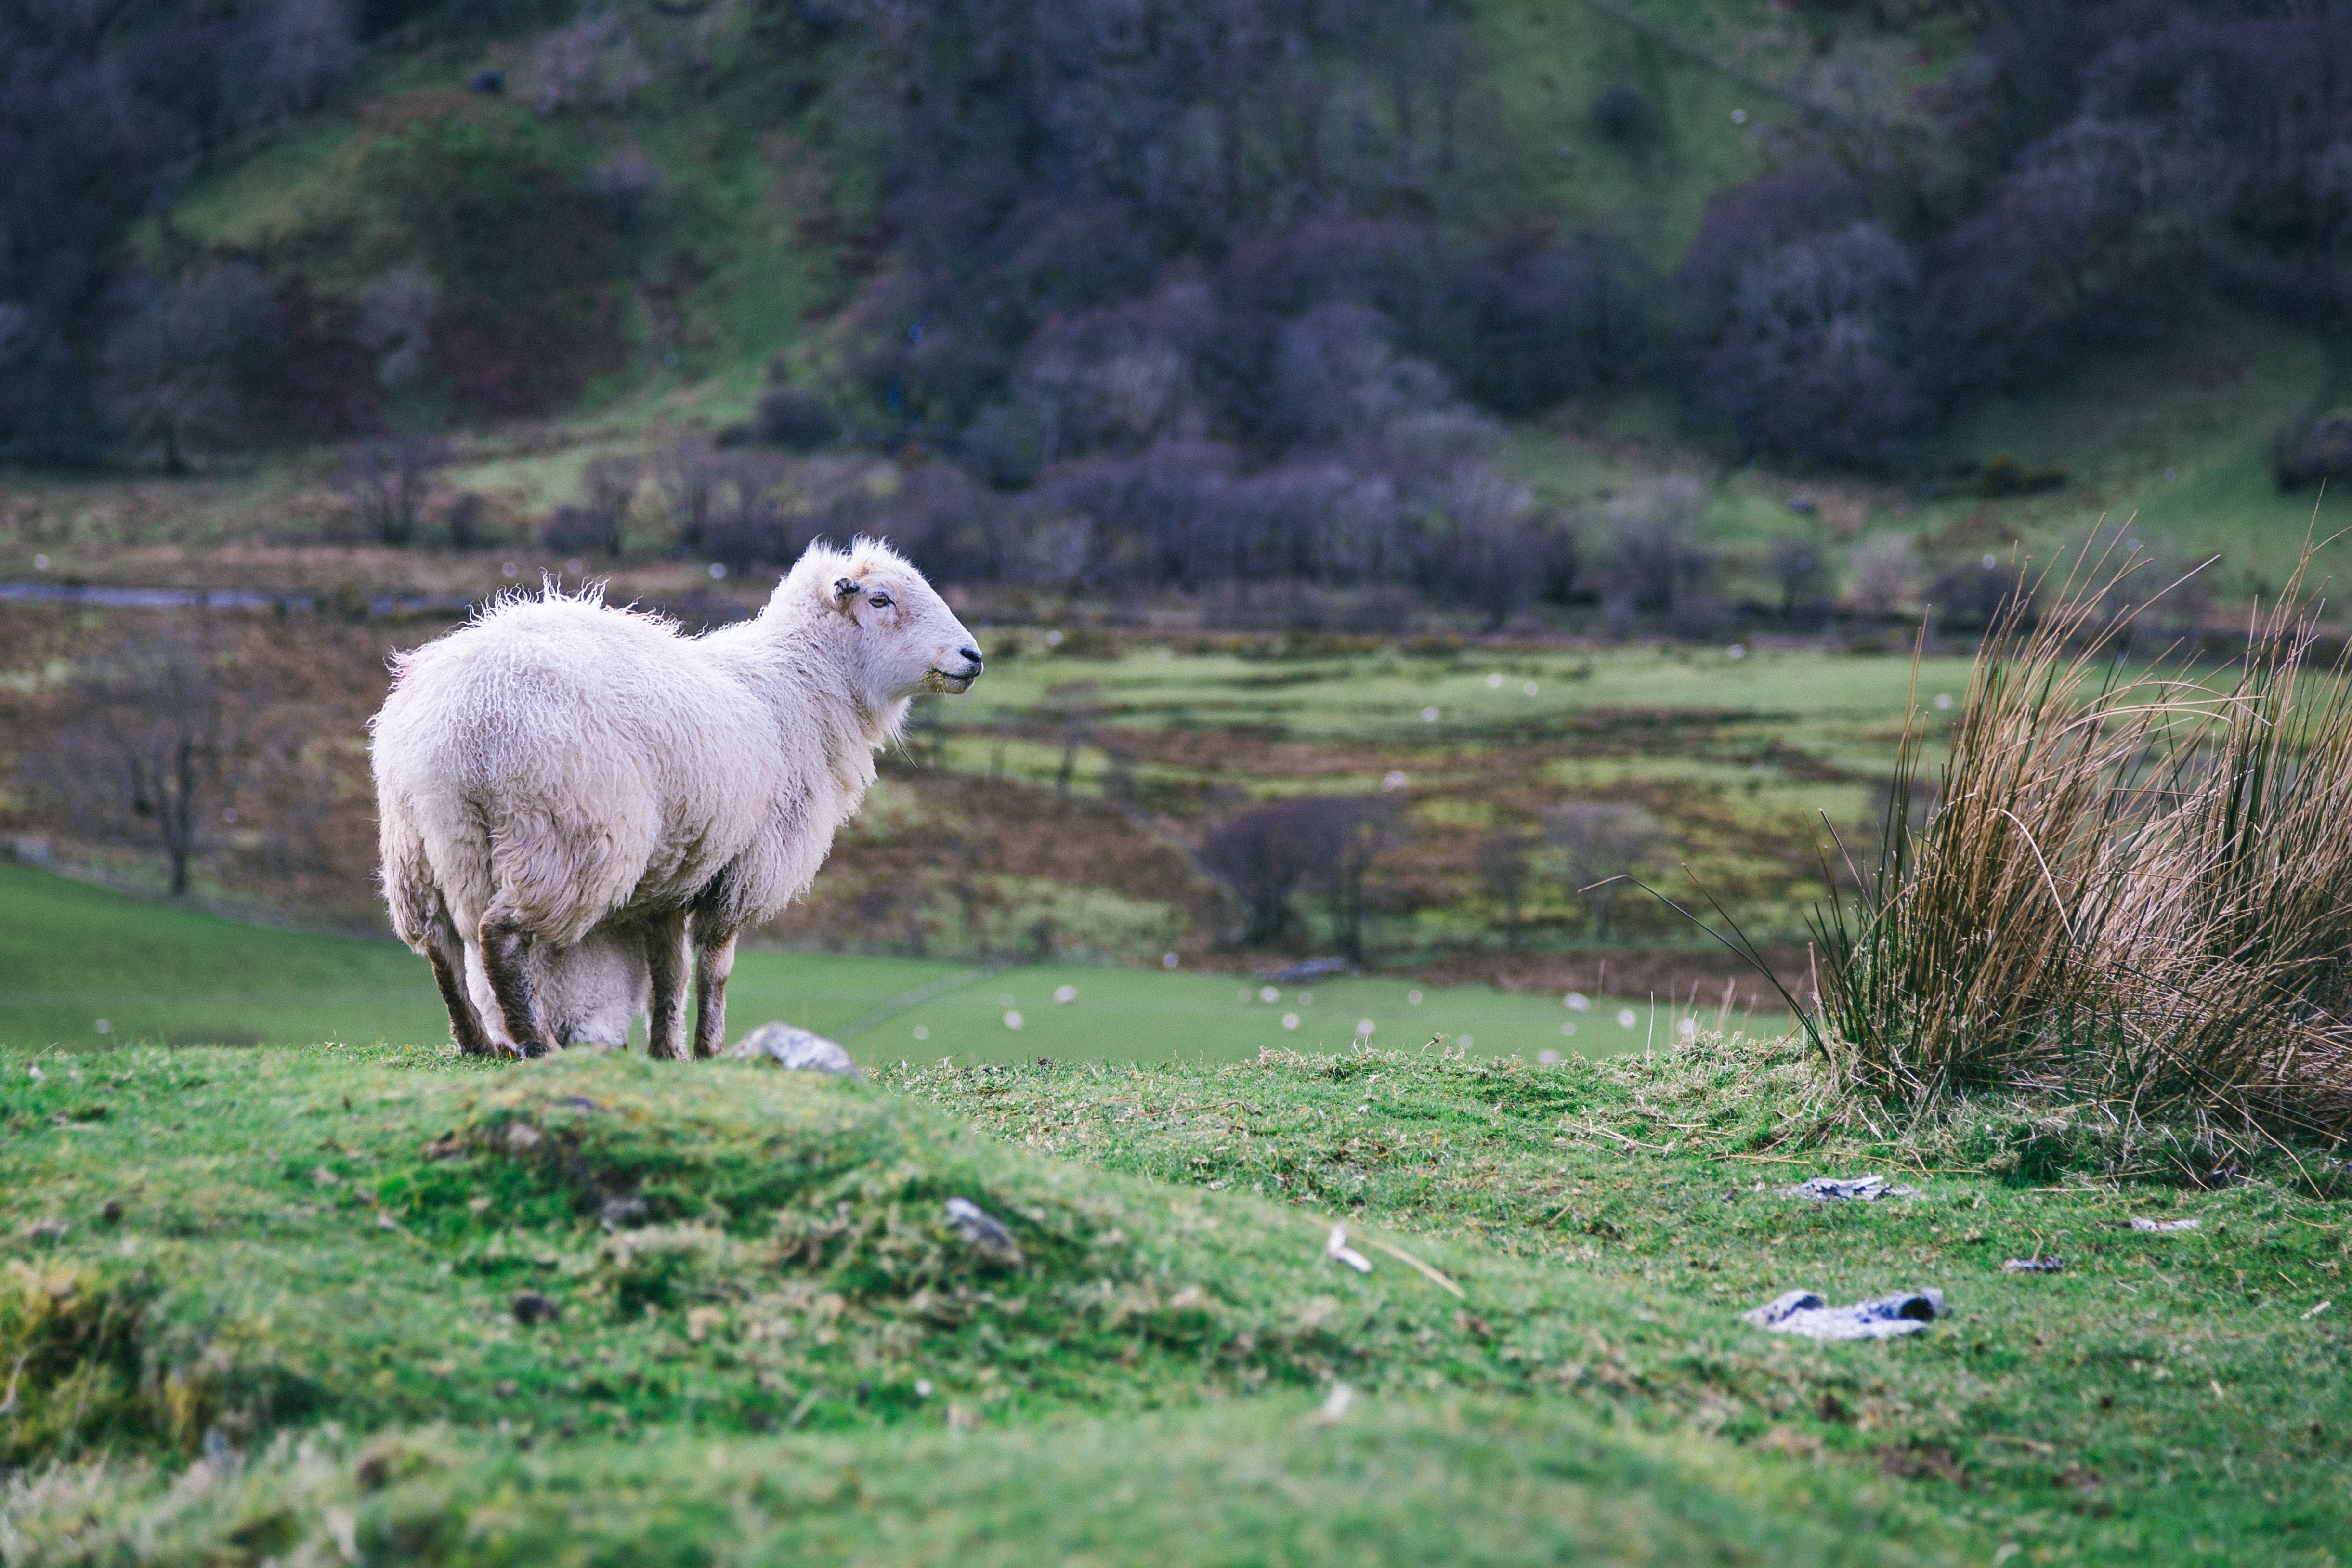 wildlife photography of white sheep standing on the grass